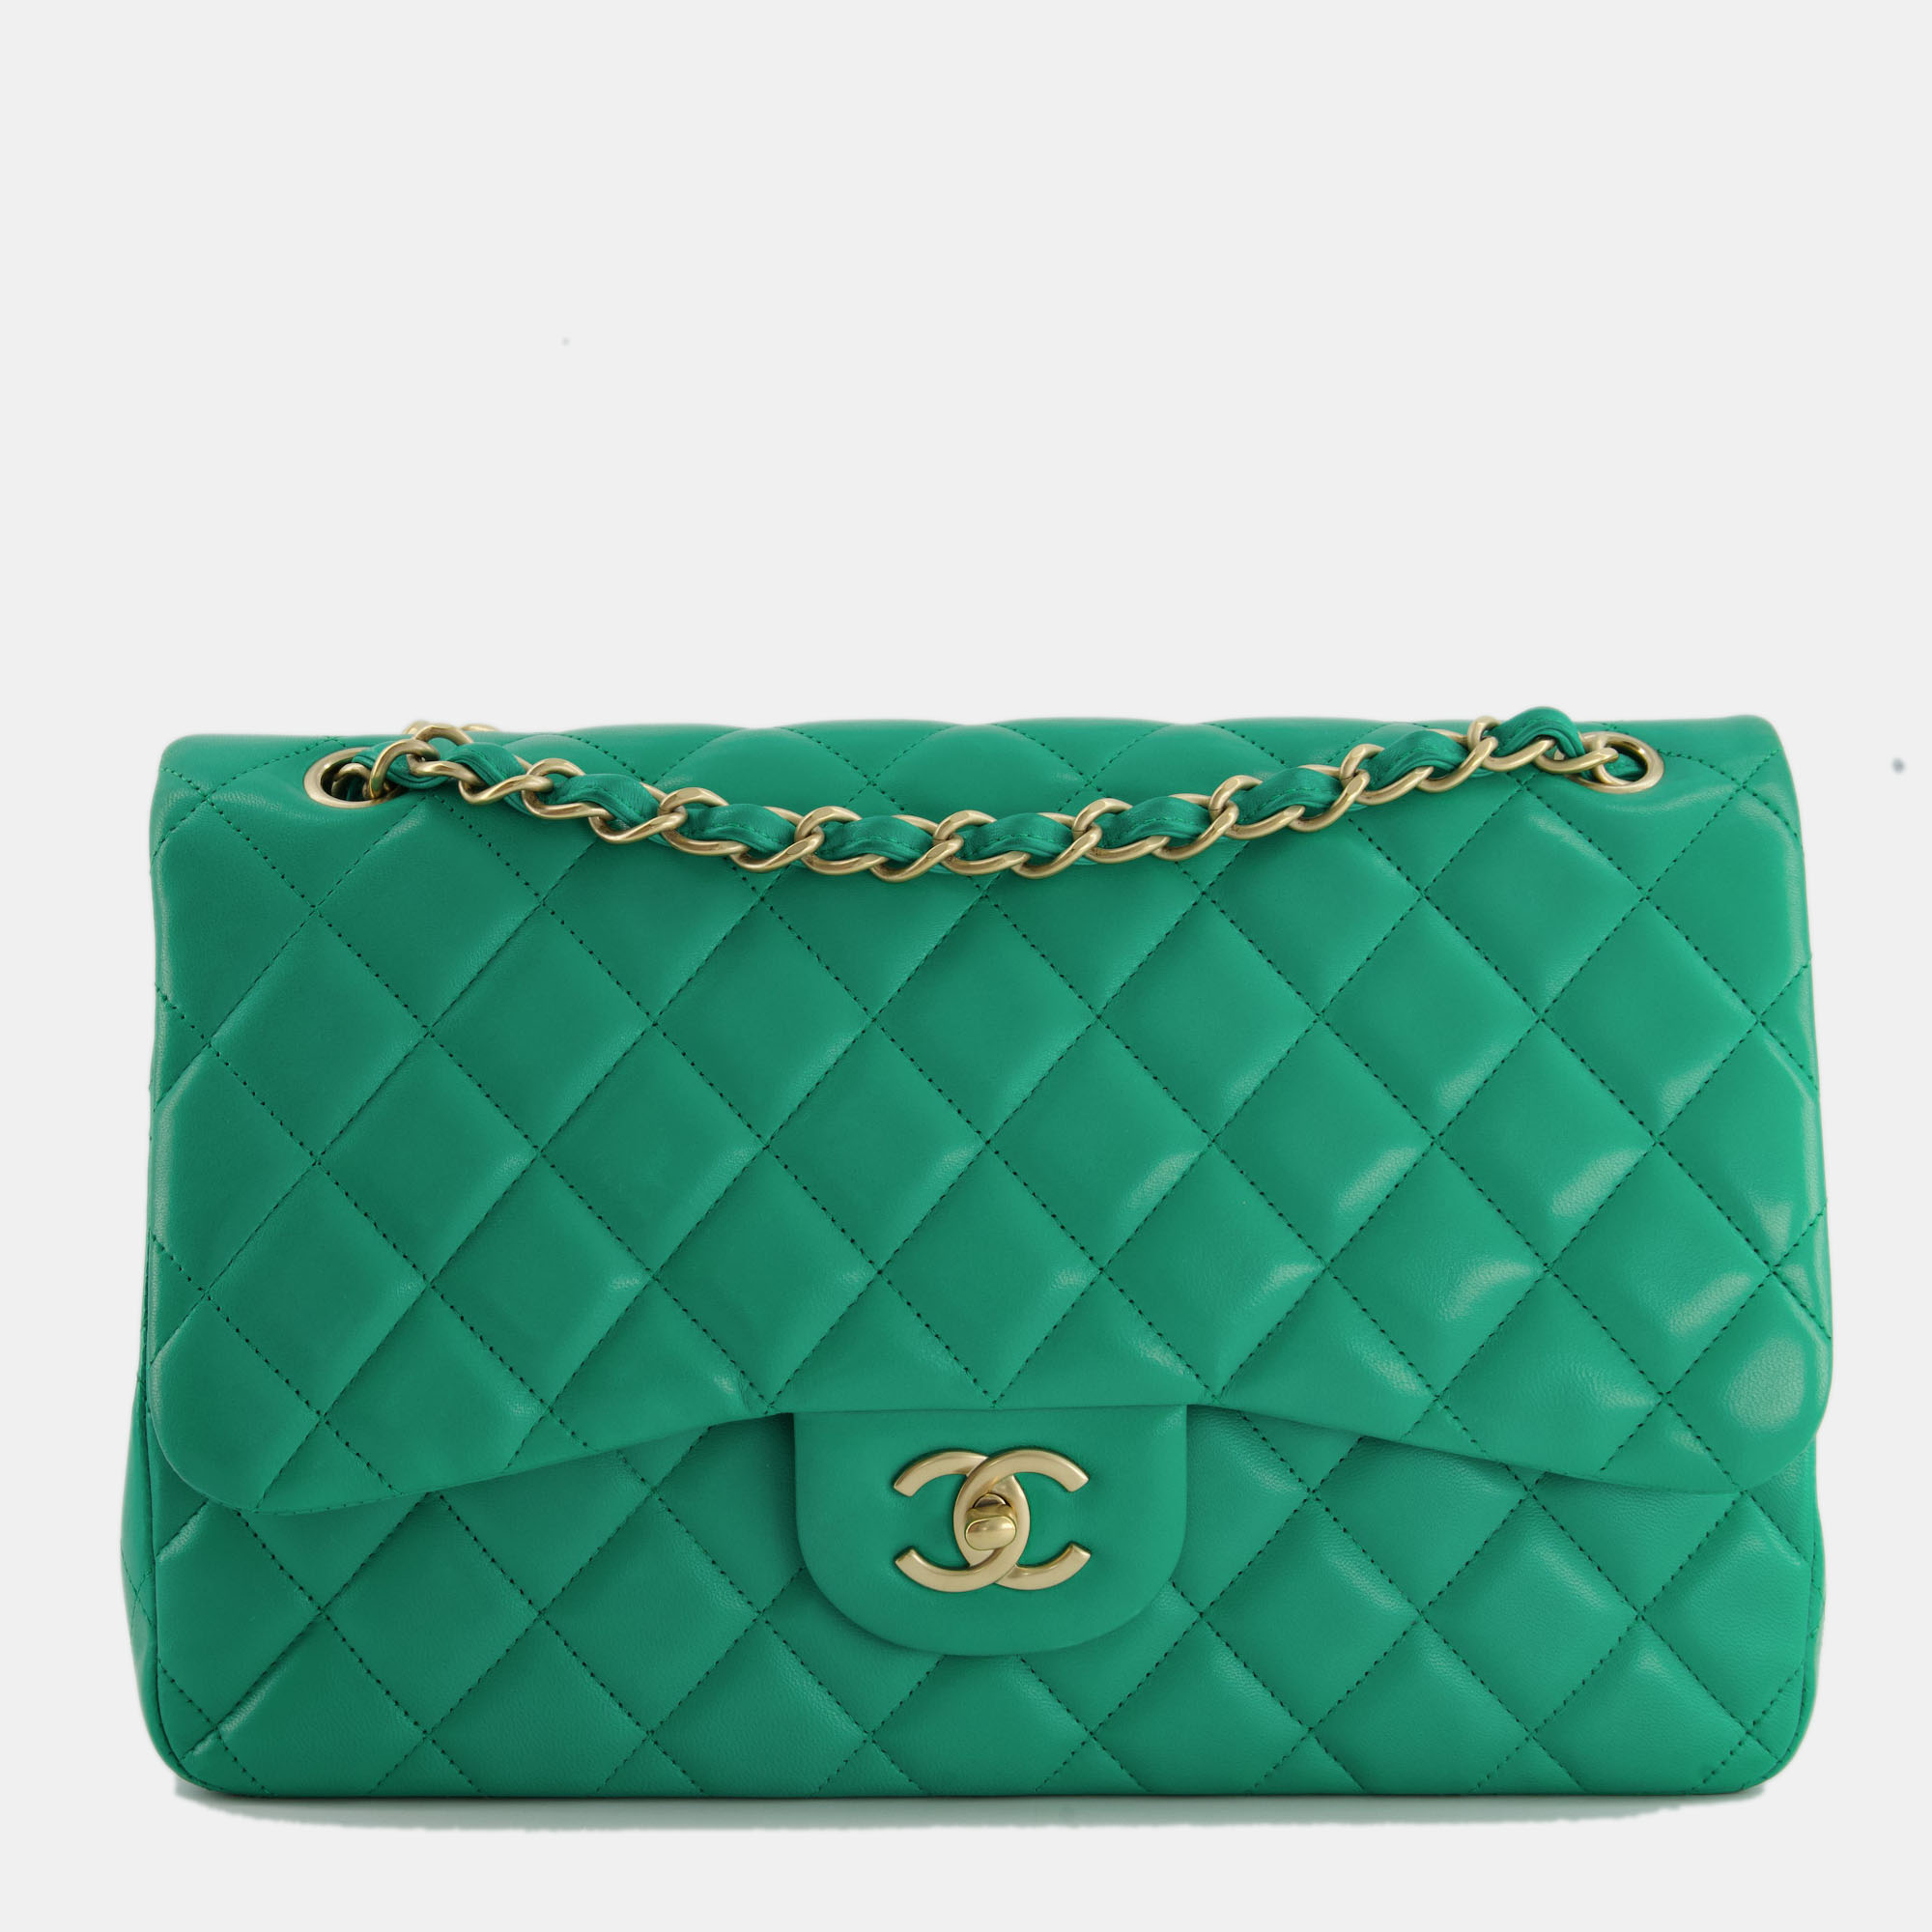 Chanel emerald green jumbo classic double flap bag in lambskin leather with brushed gold hardware